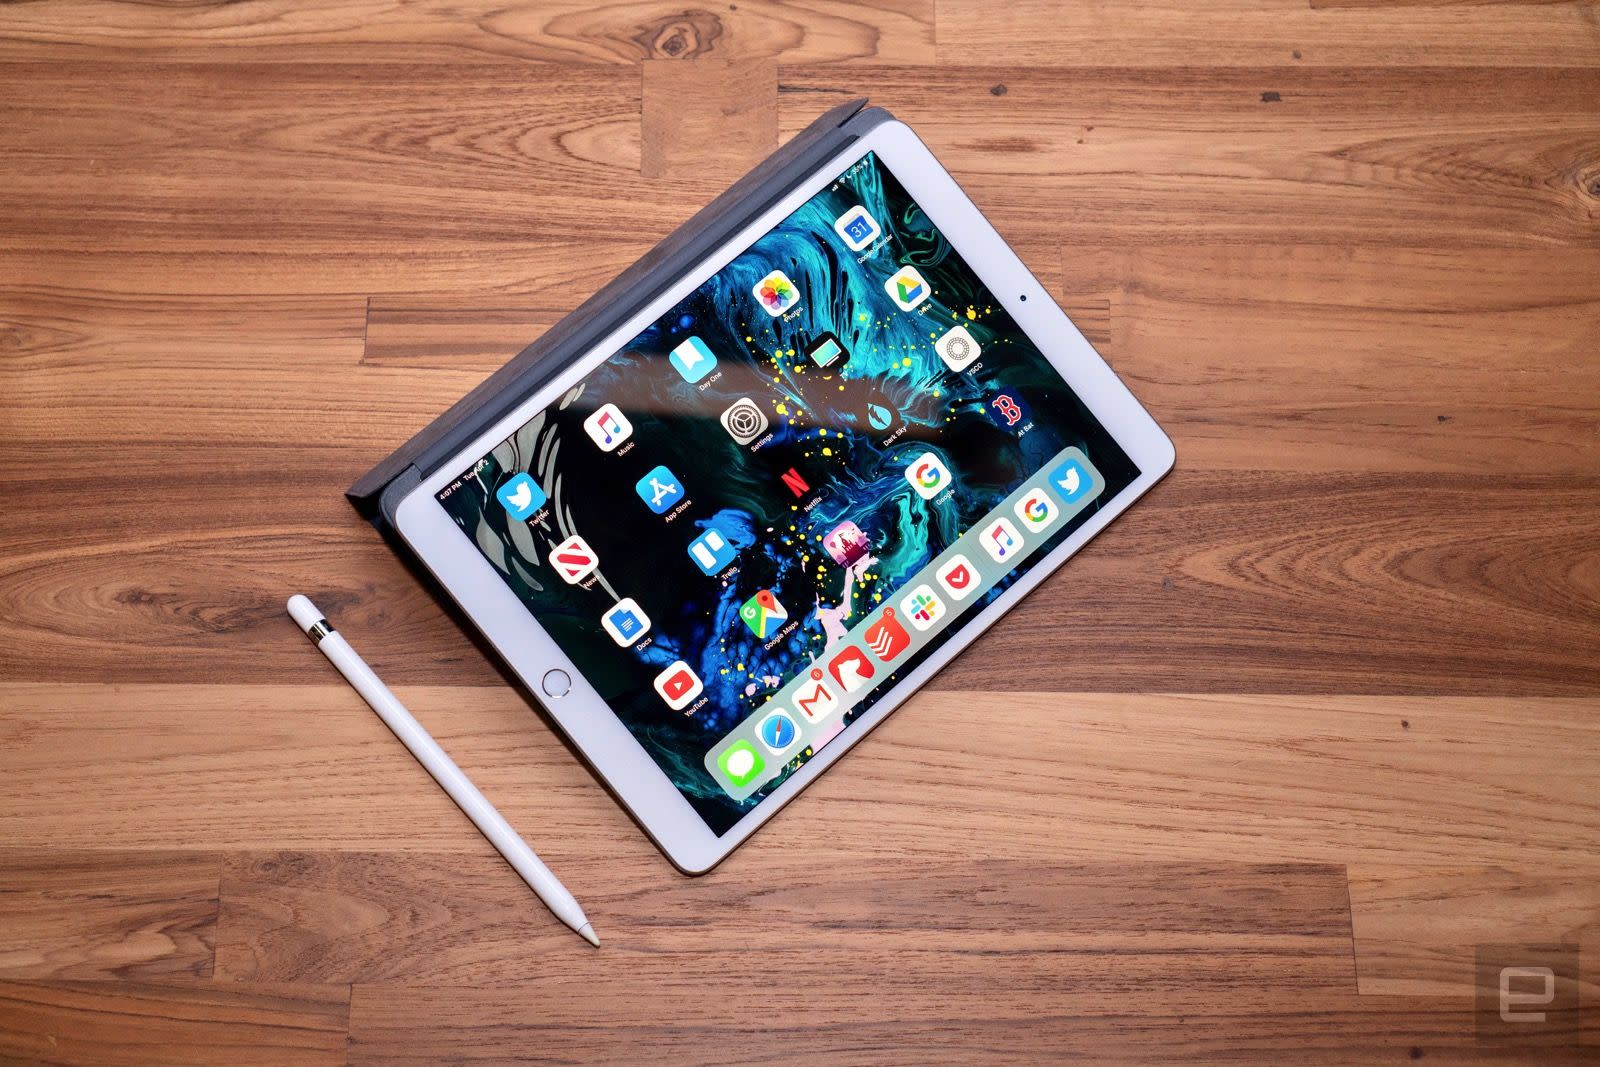 Apple's 256GB iPad Air is on sale for $549 | Engadget